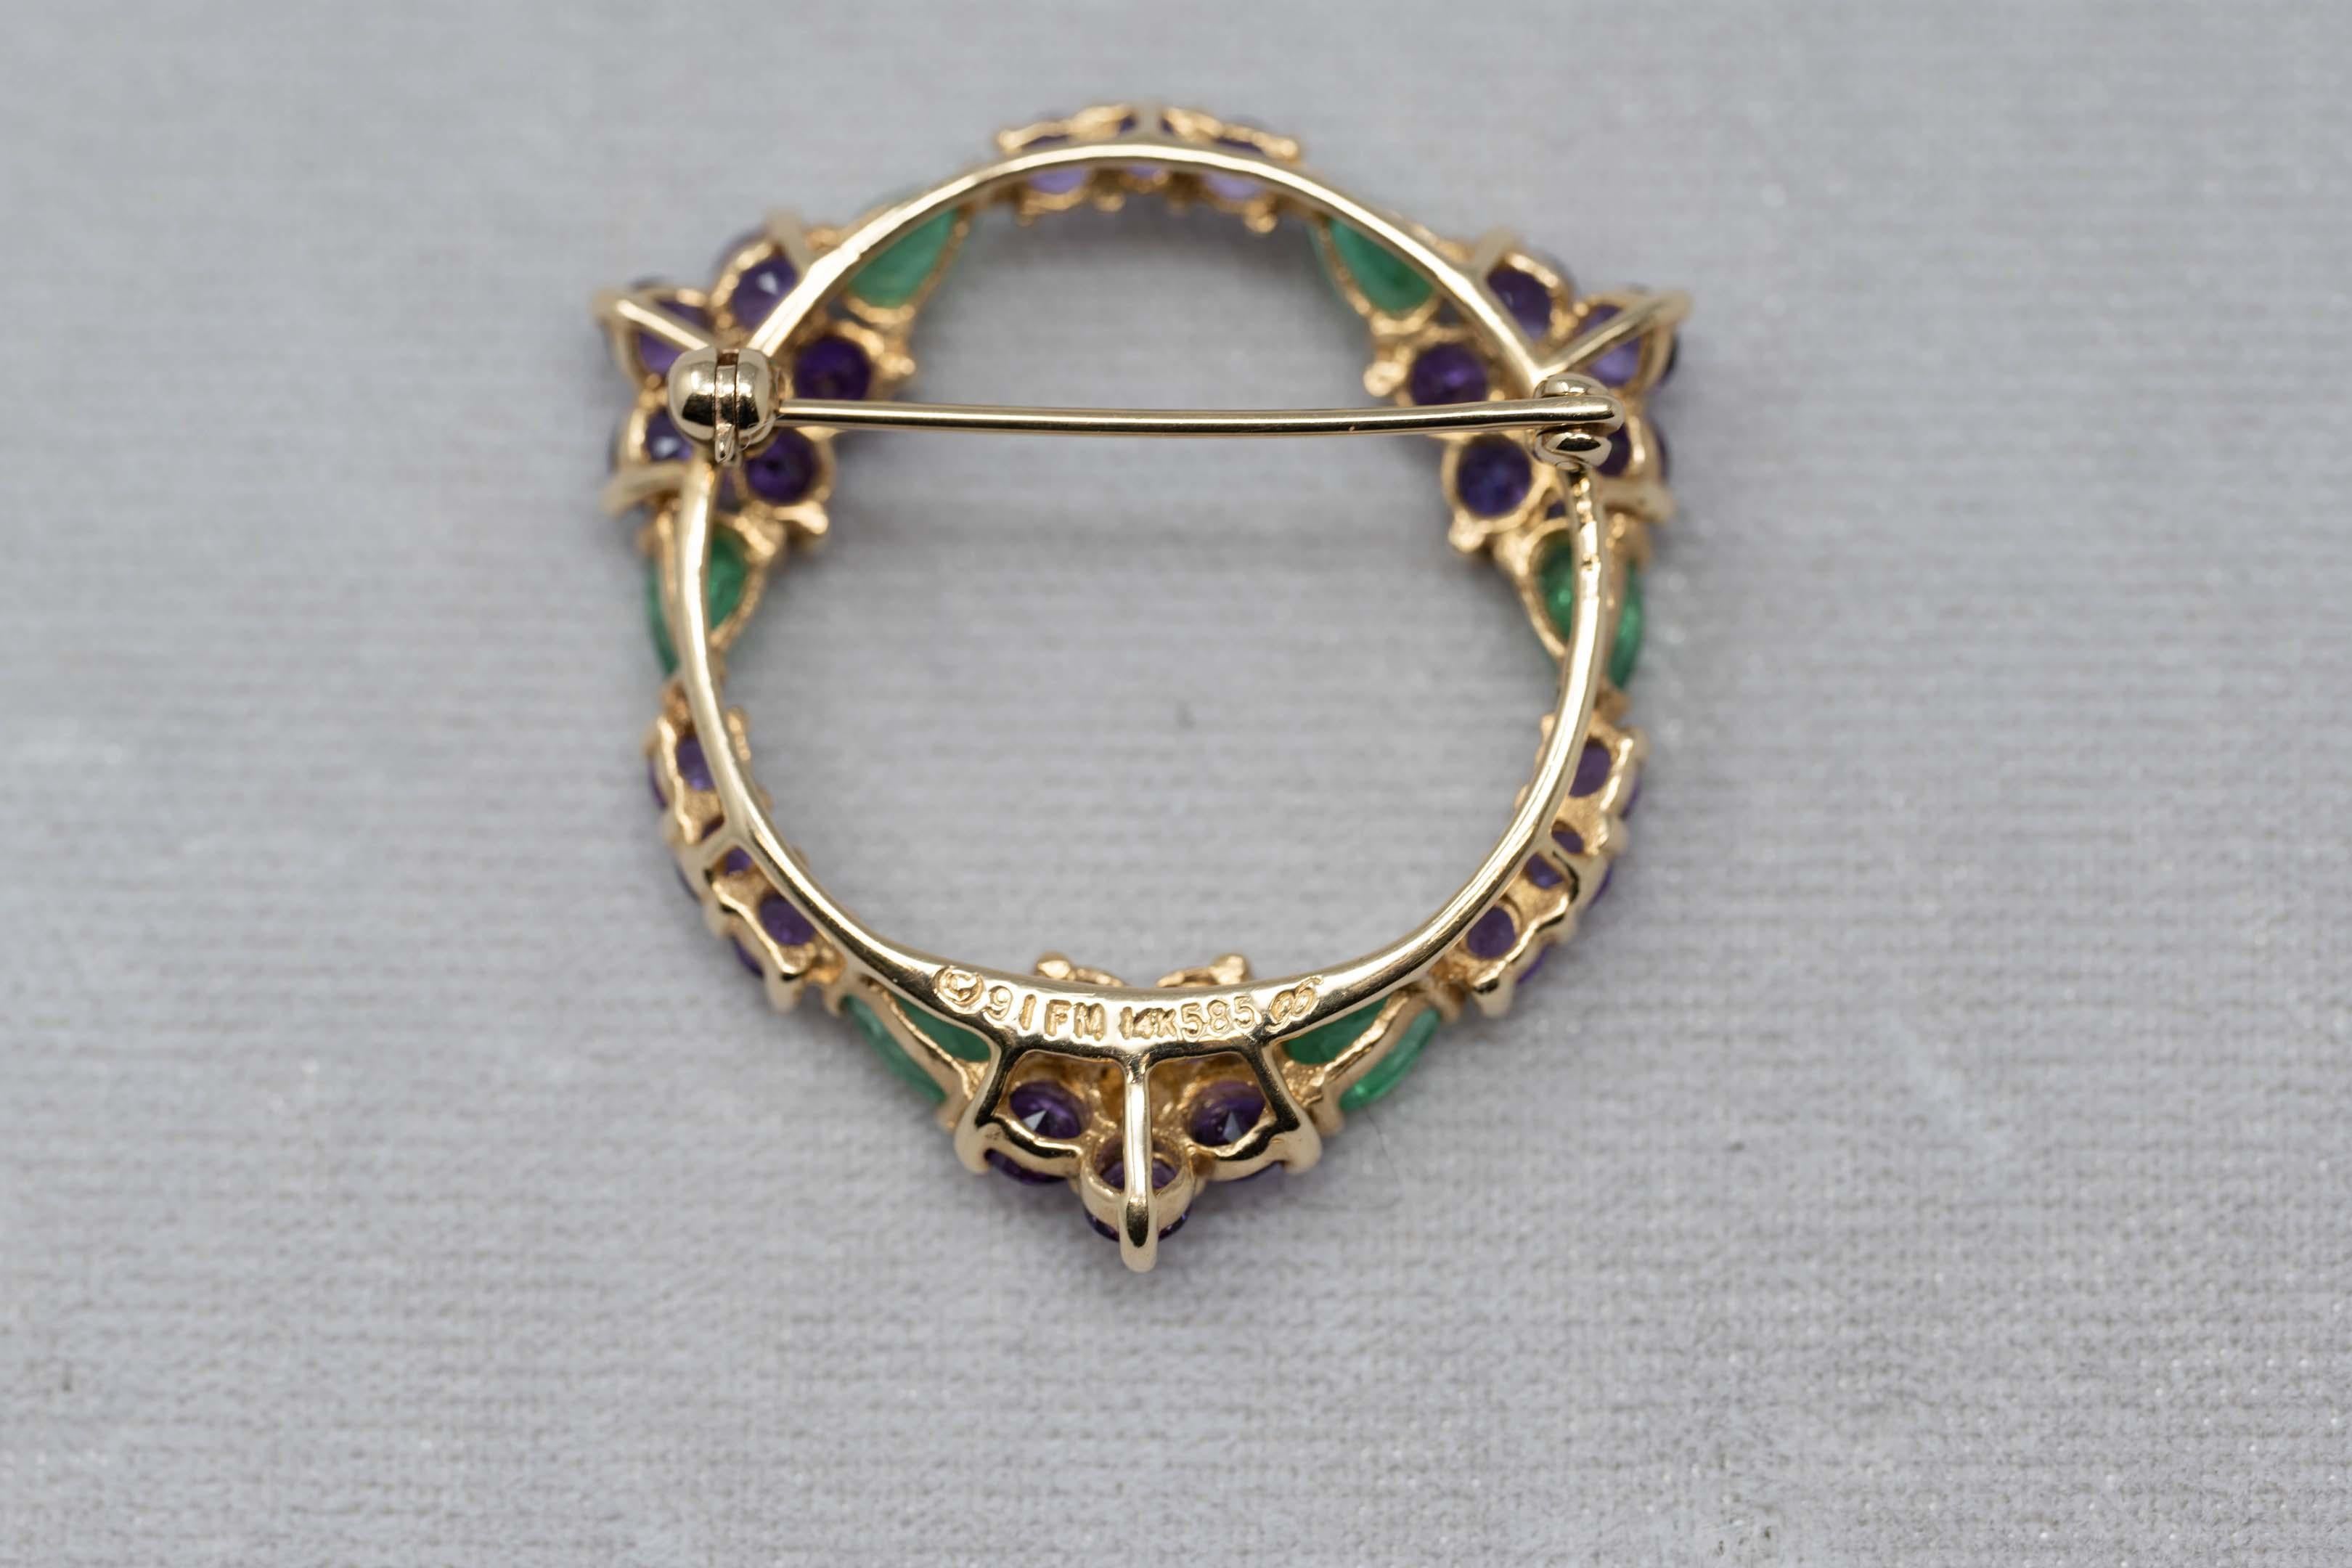 House of Igor Carl Faberge for Franklin Mint 14k yellow gold, brooch diamonds, emeralds and amethyst gemstones. Dated 91, marked 14k FM with Faberge mark. Measures 32 mm in diameter. 5.7 grams.
